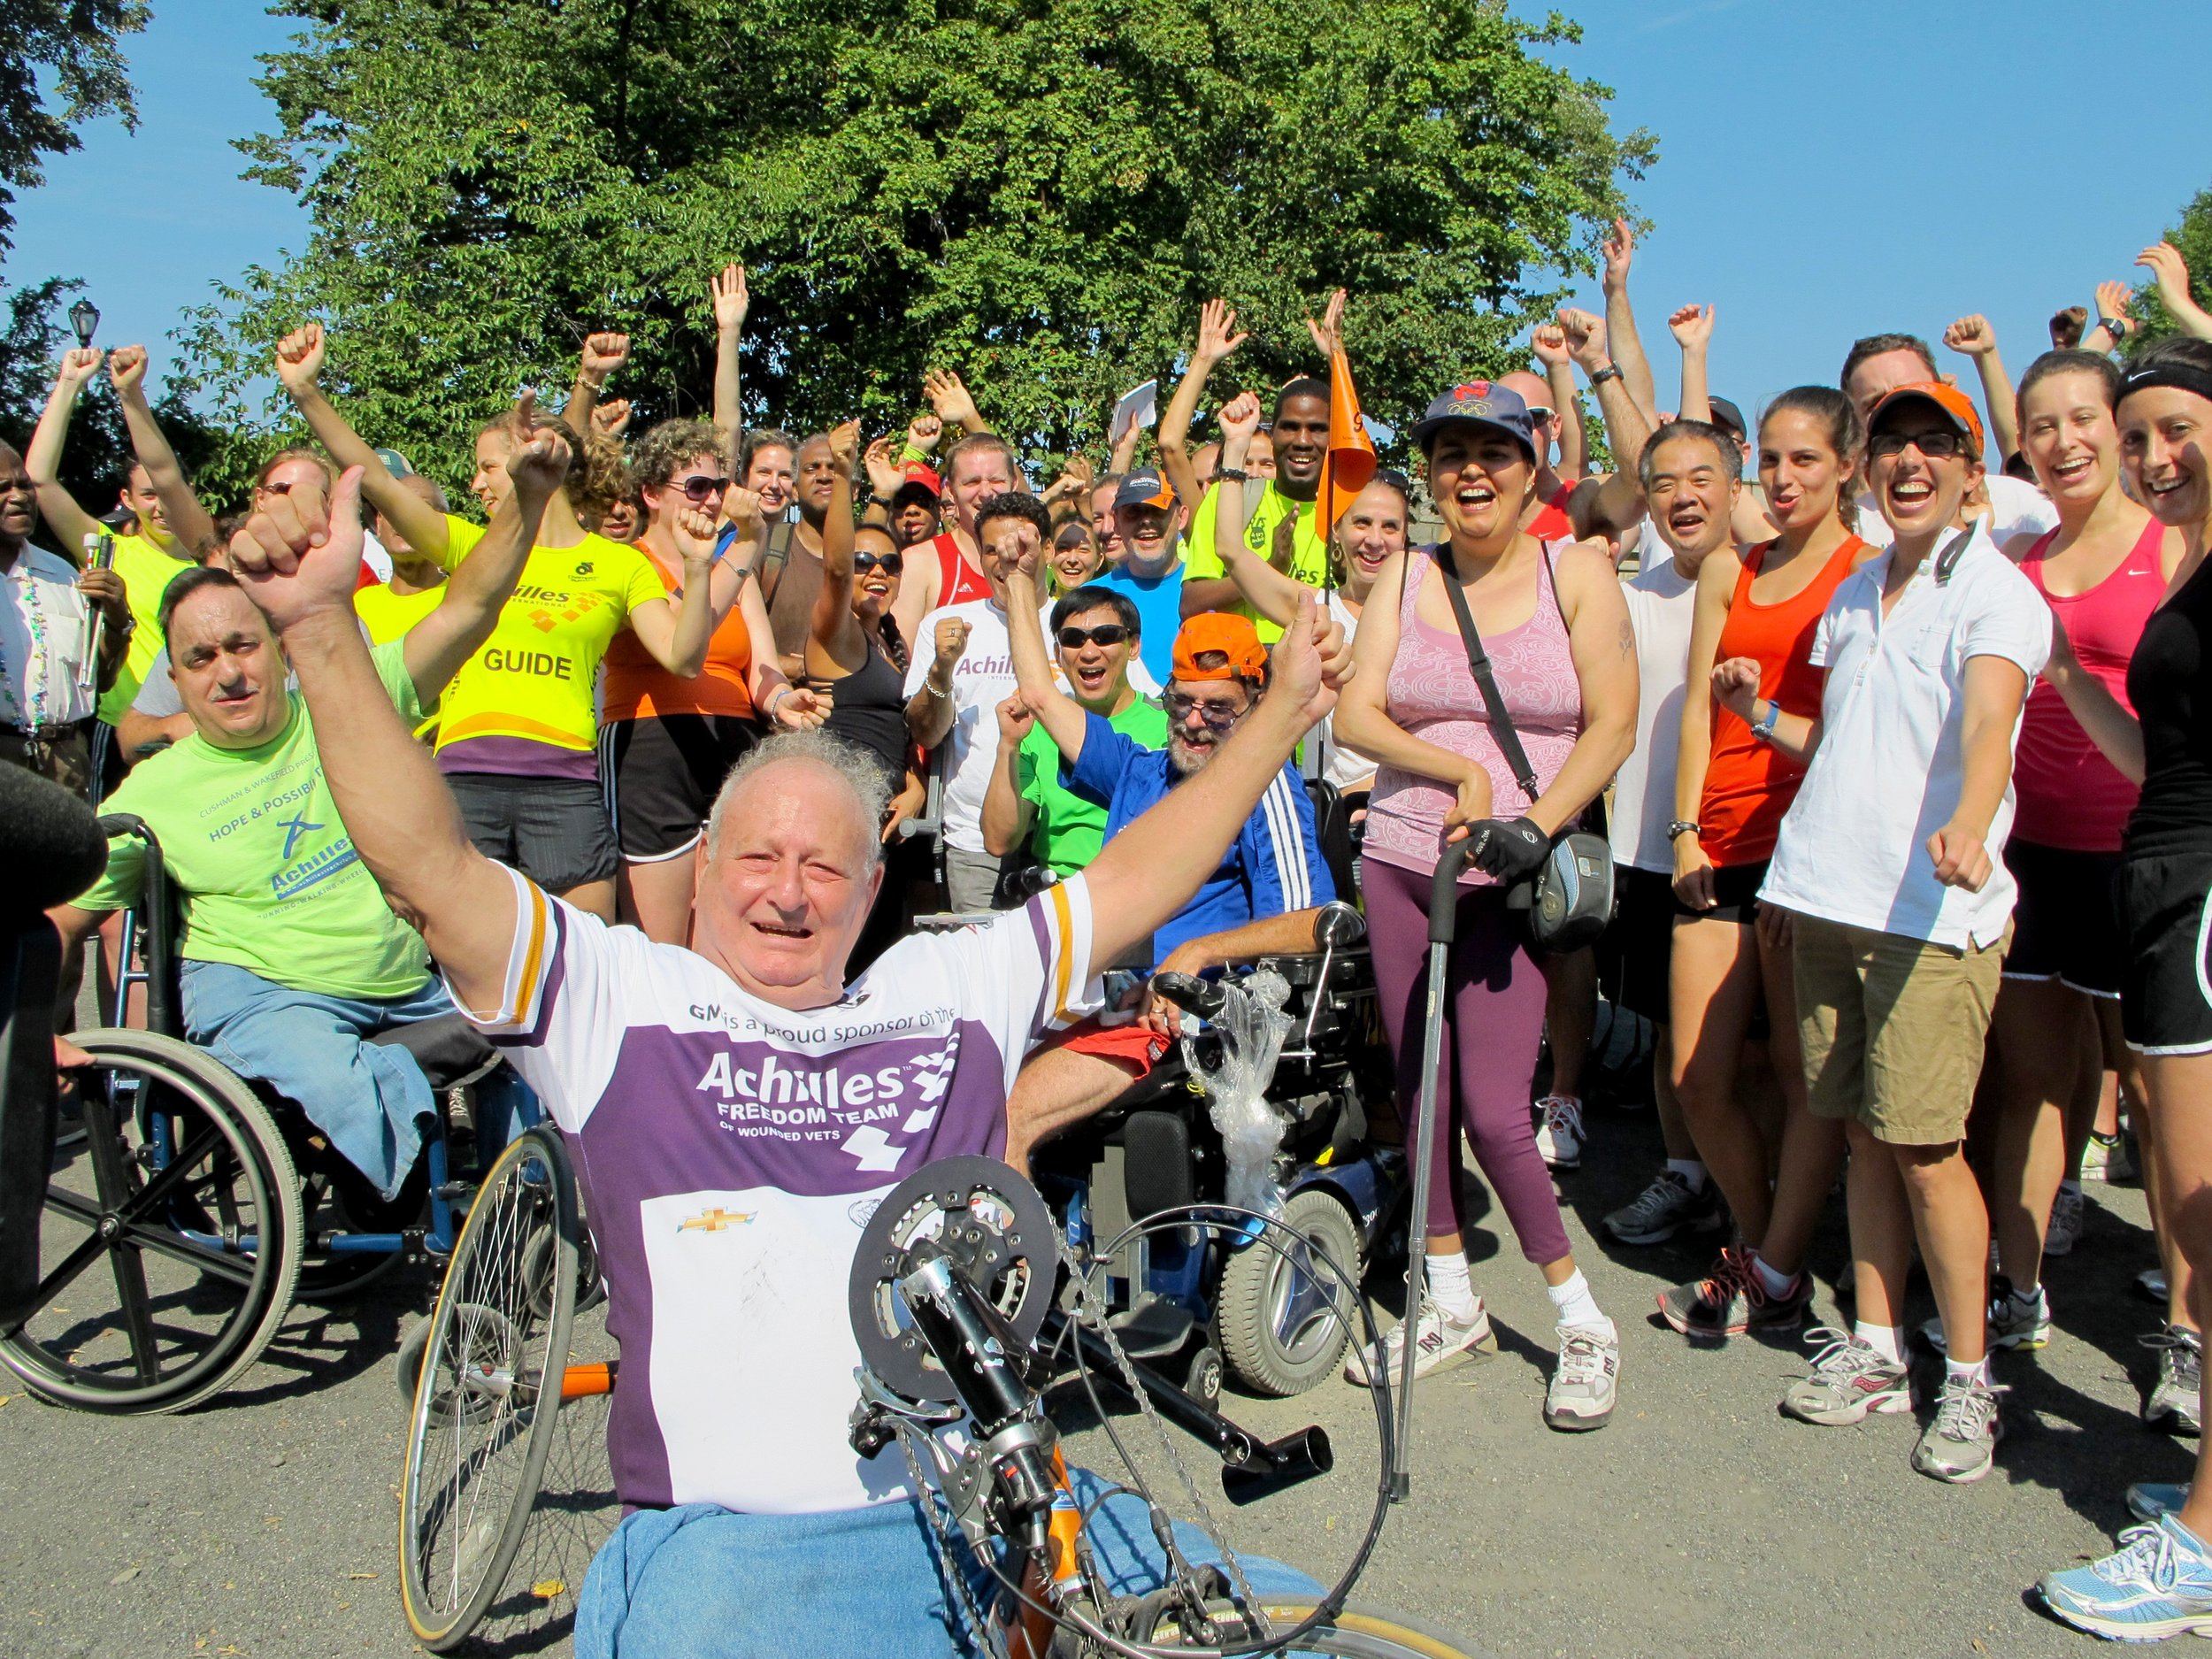  Dick Traum cheering with Achilles athletes and supporters  